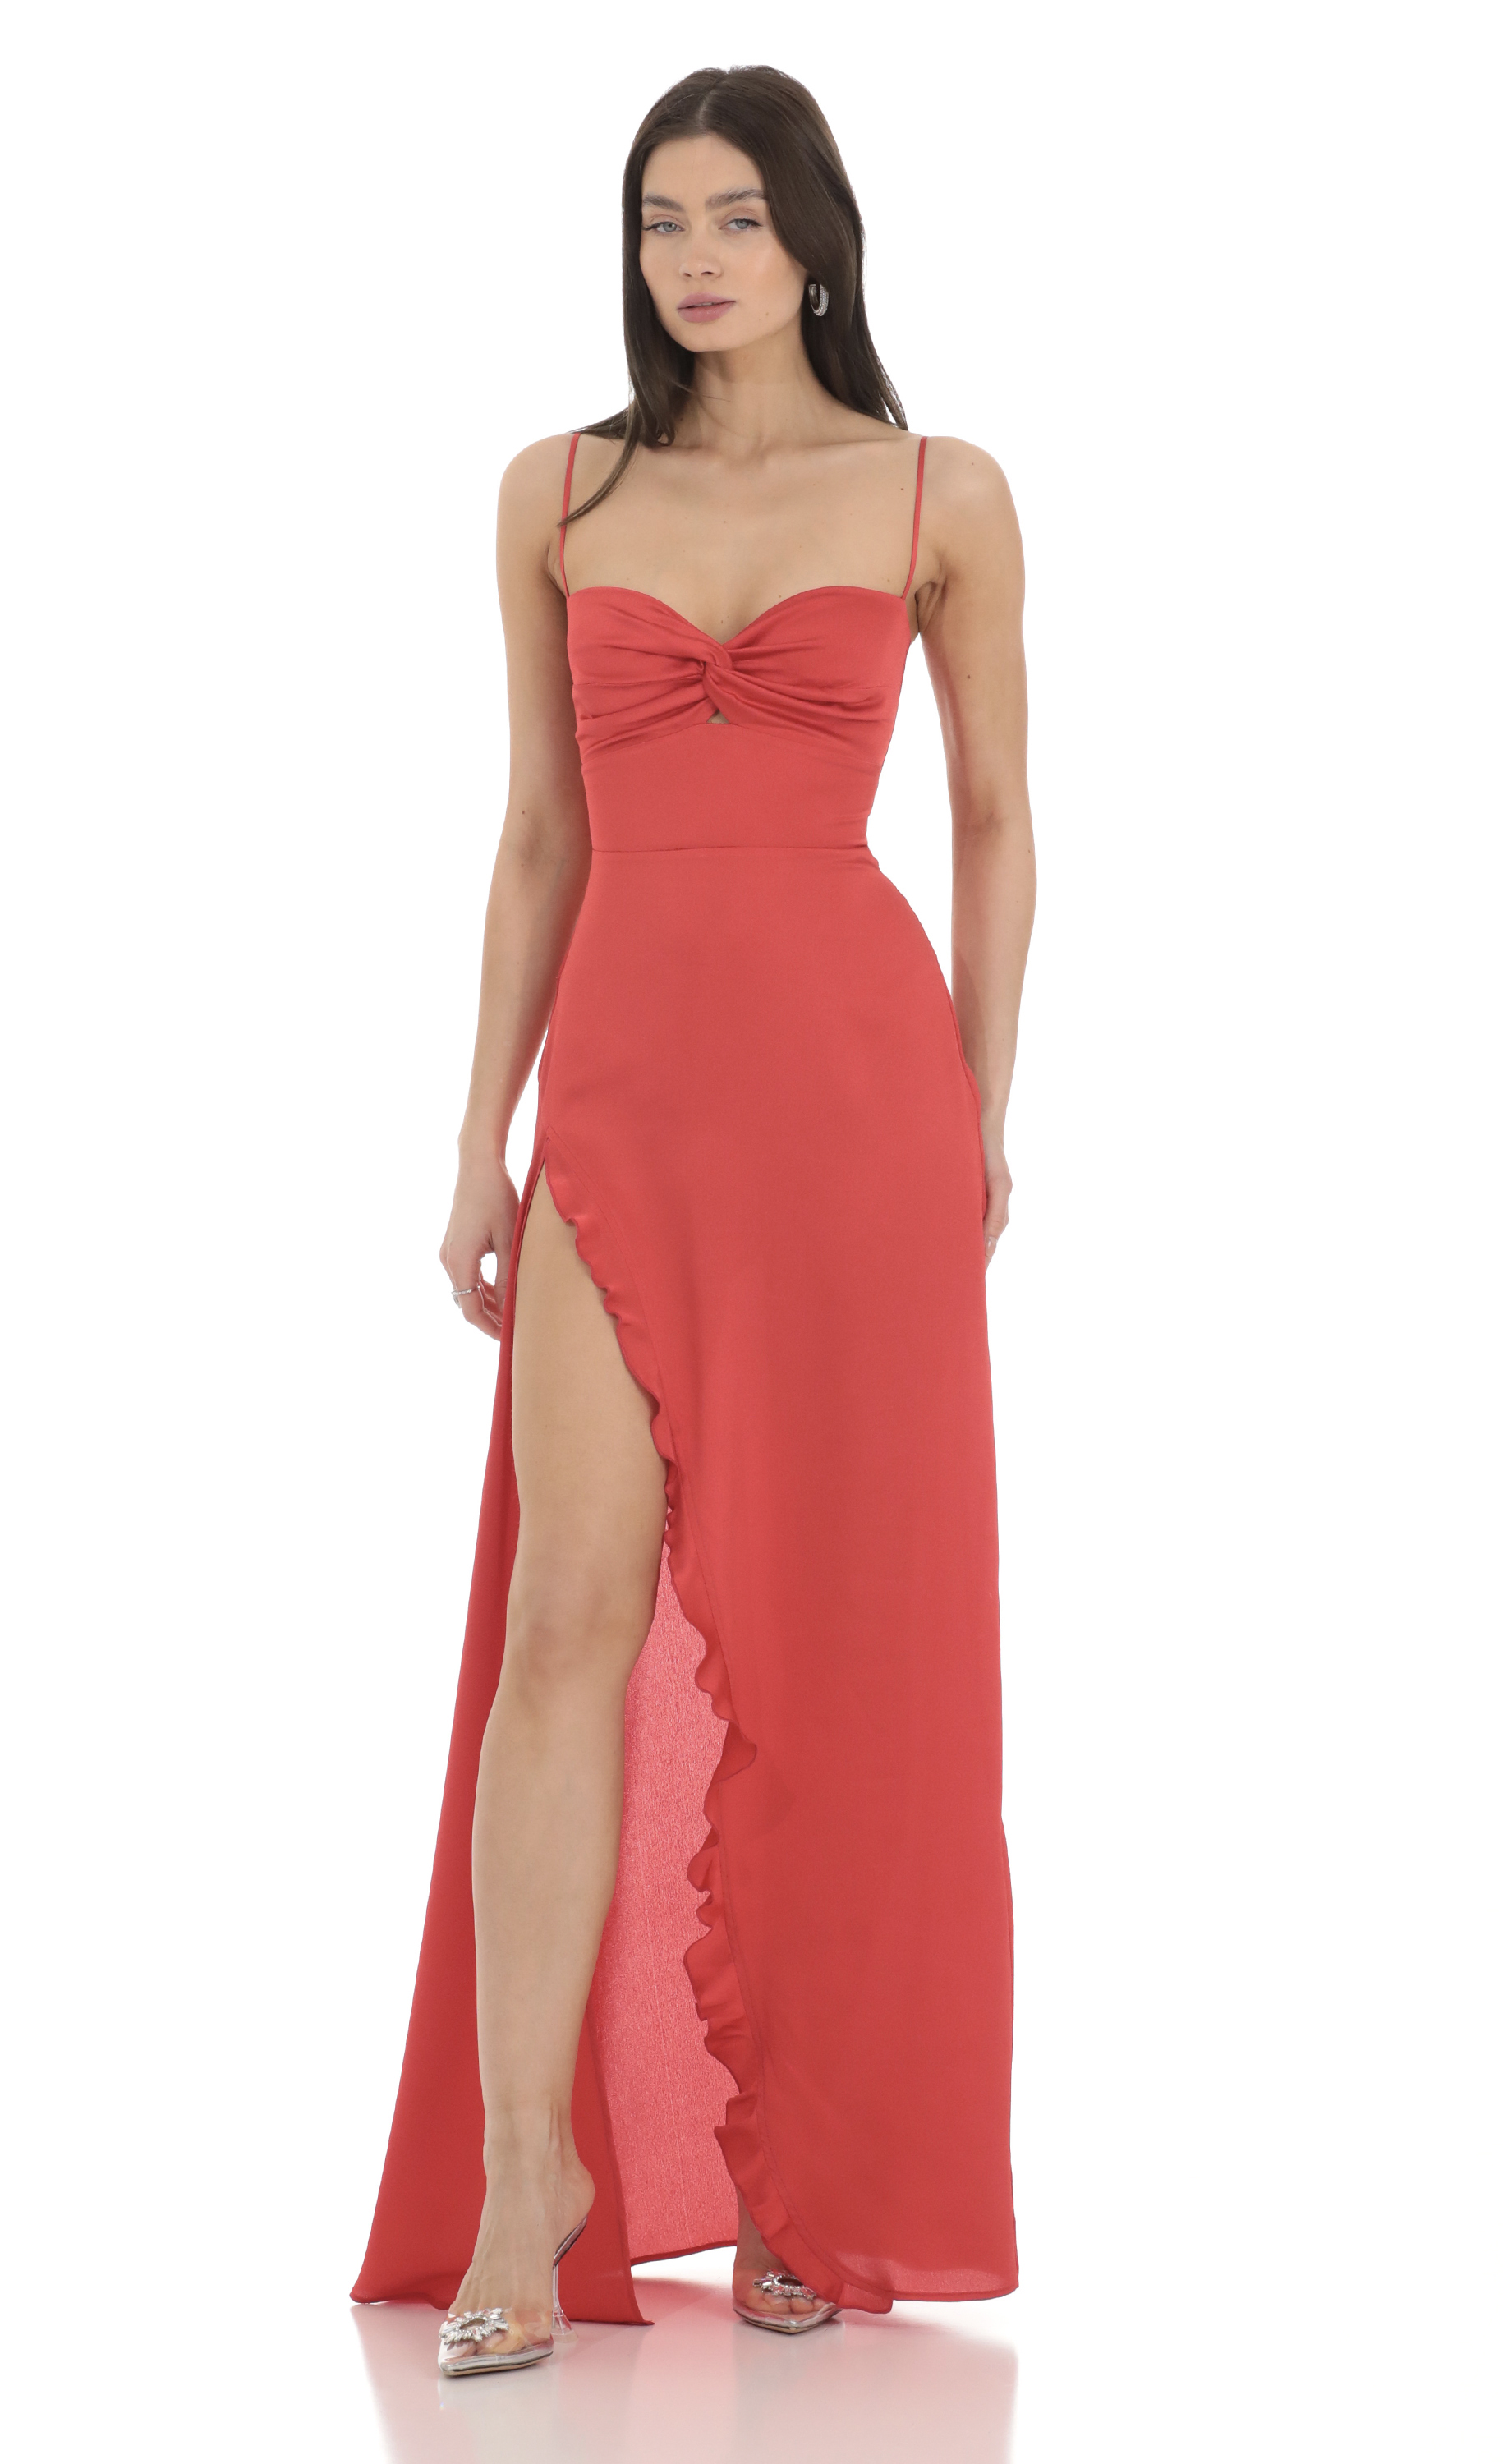 Satin Front Twist Strappy Maxi Dress in Red